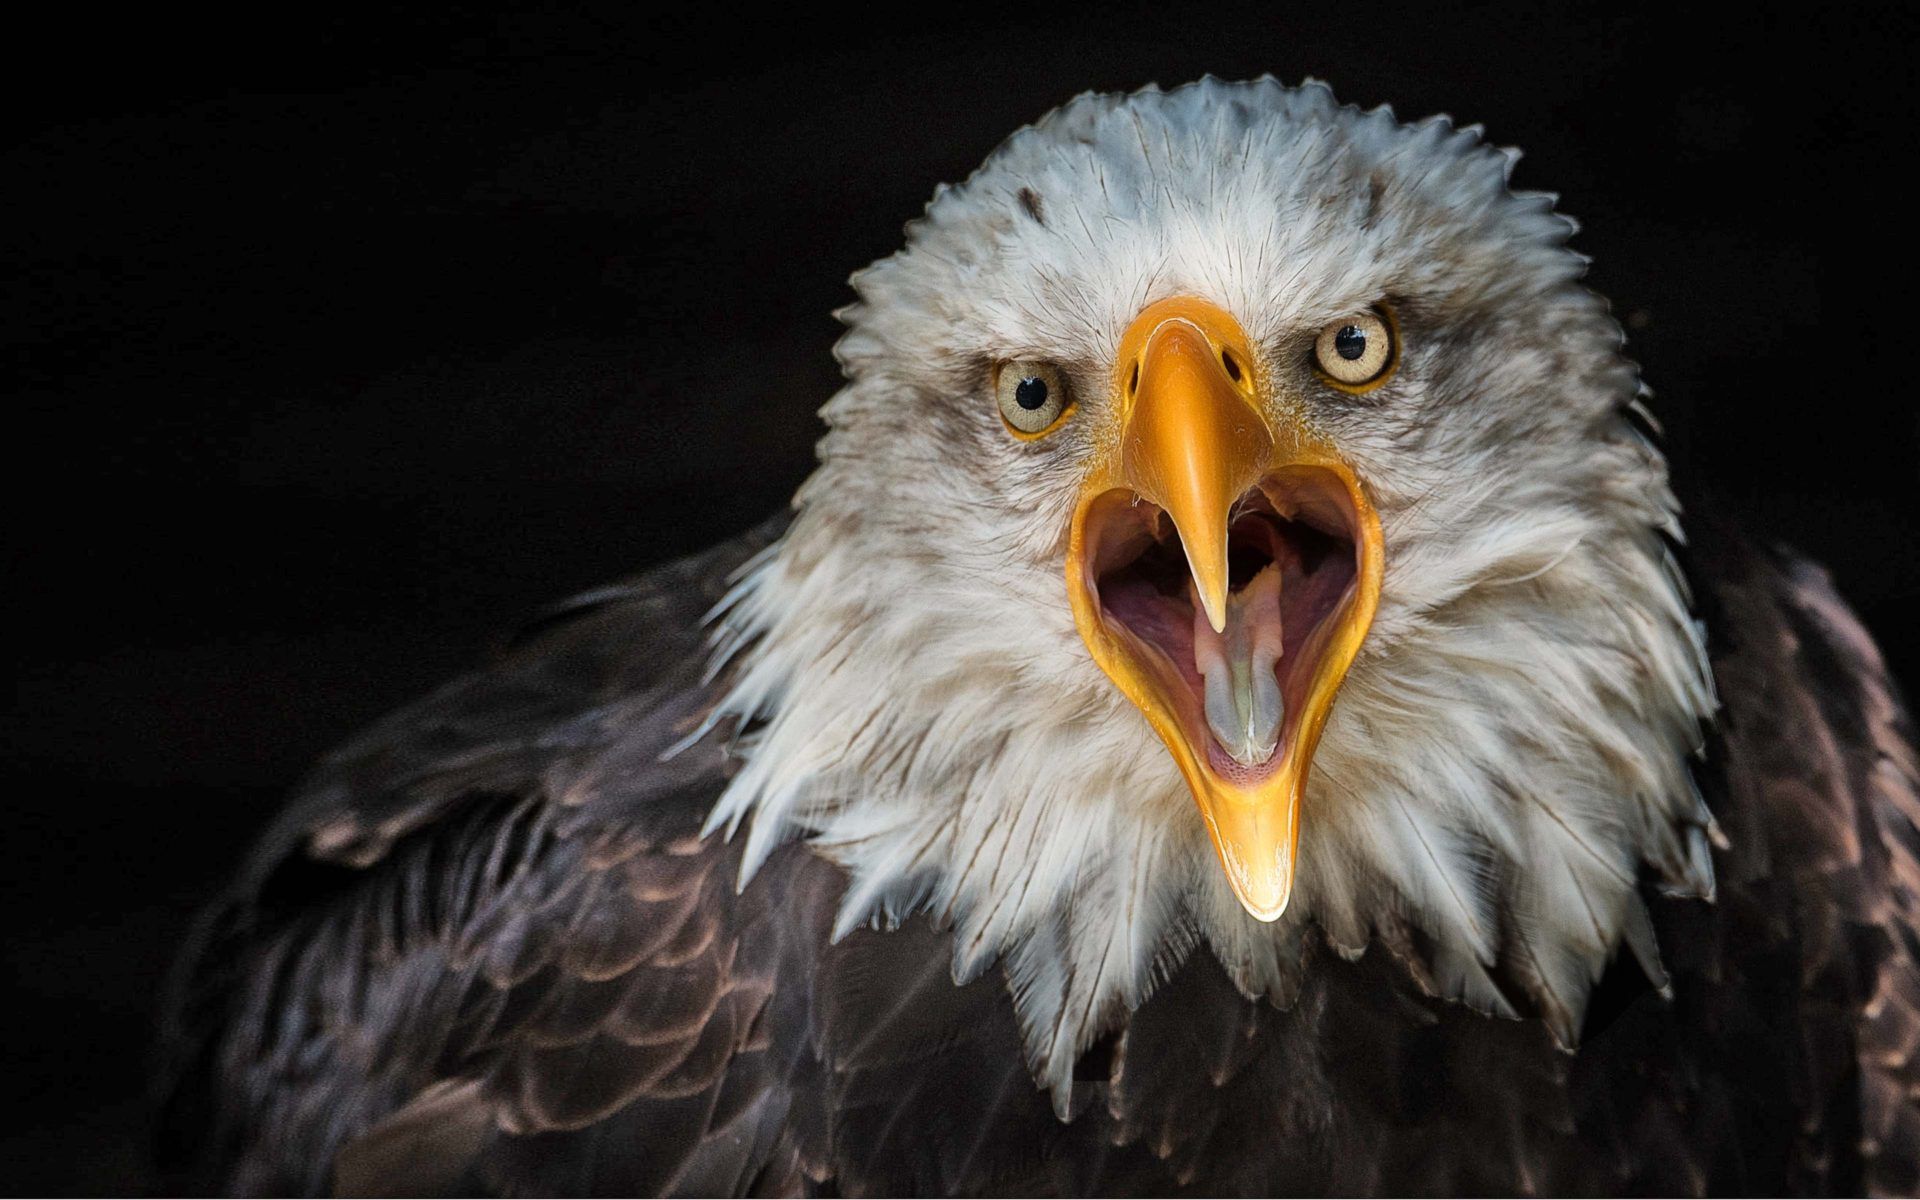 Bird Bald Eagle From Close Up 4k Ultra Hd Wallpapers For Desktop